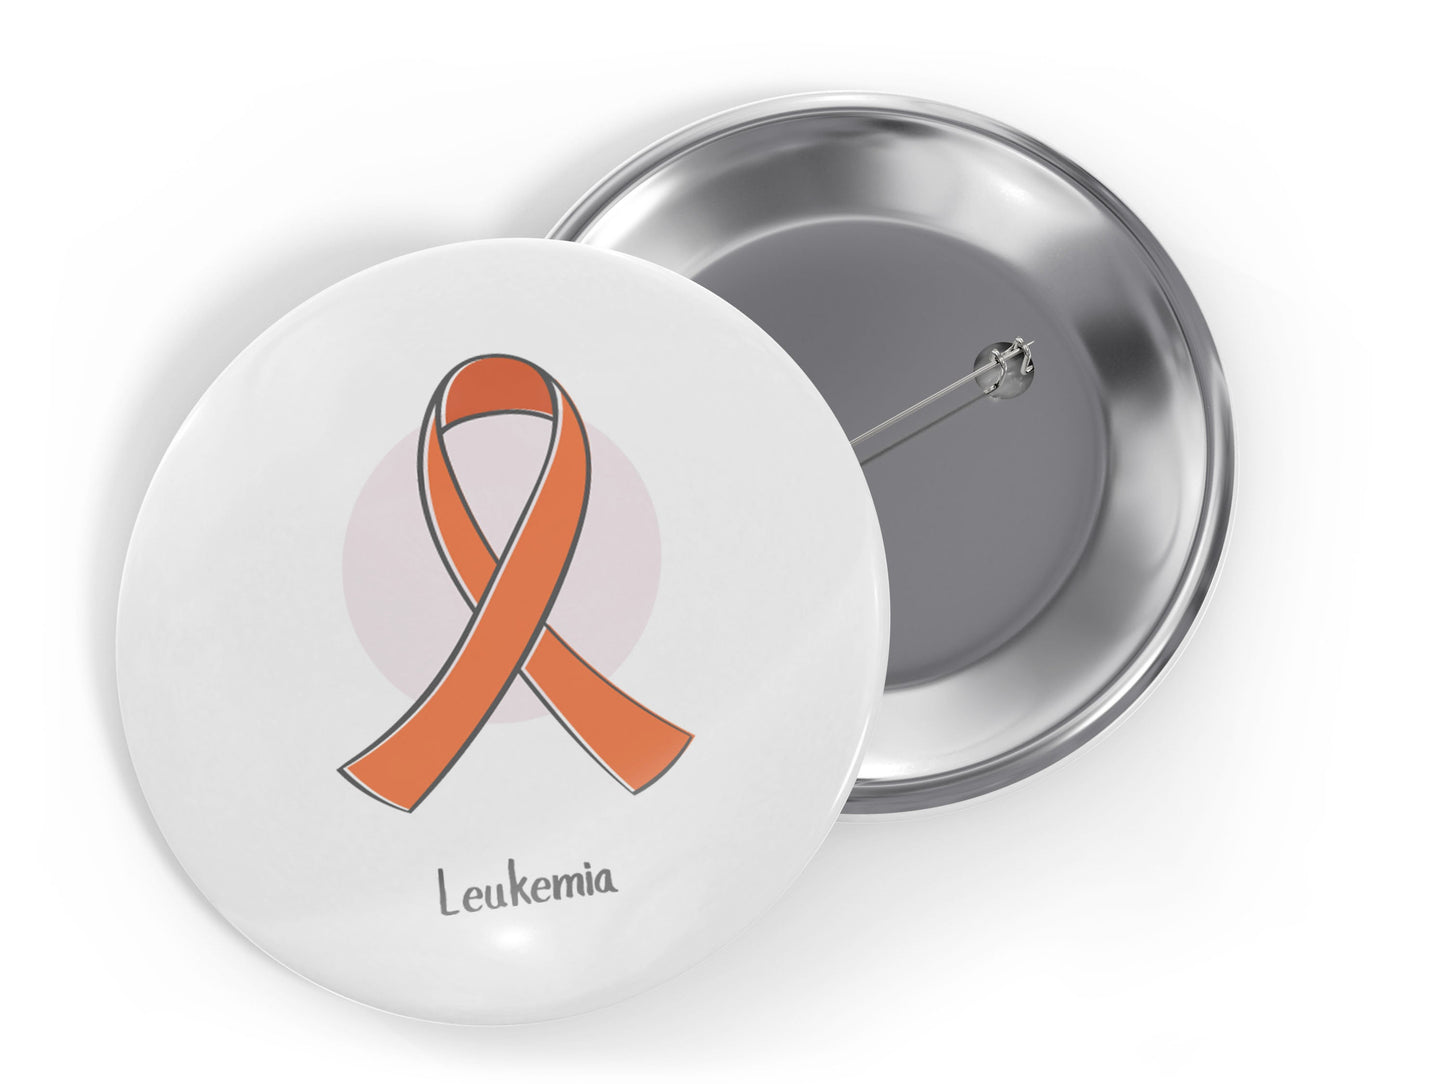 Childhood Cancer Awareness Button Pins for Survivor, Cancer Ribbon Support Gift Ideas - 10 pieces